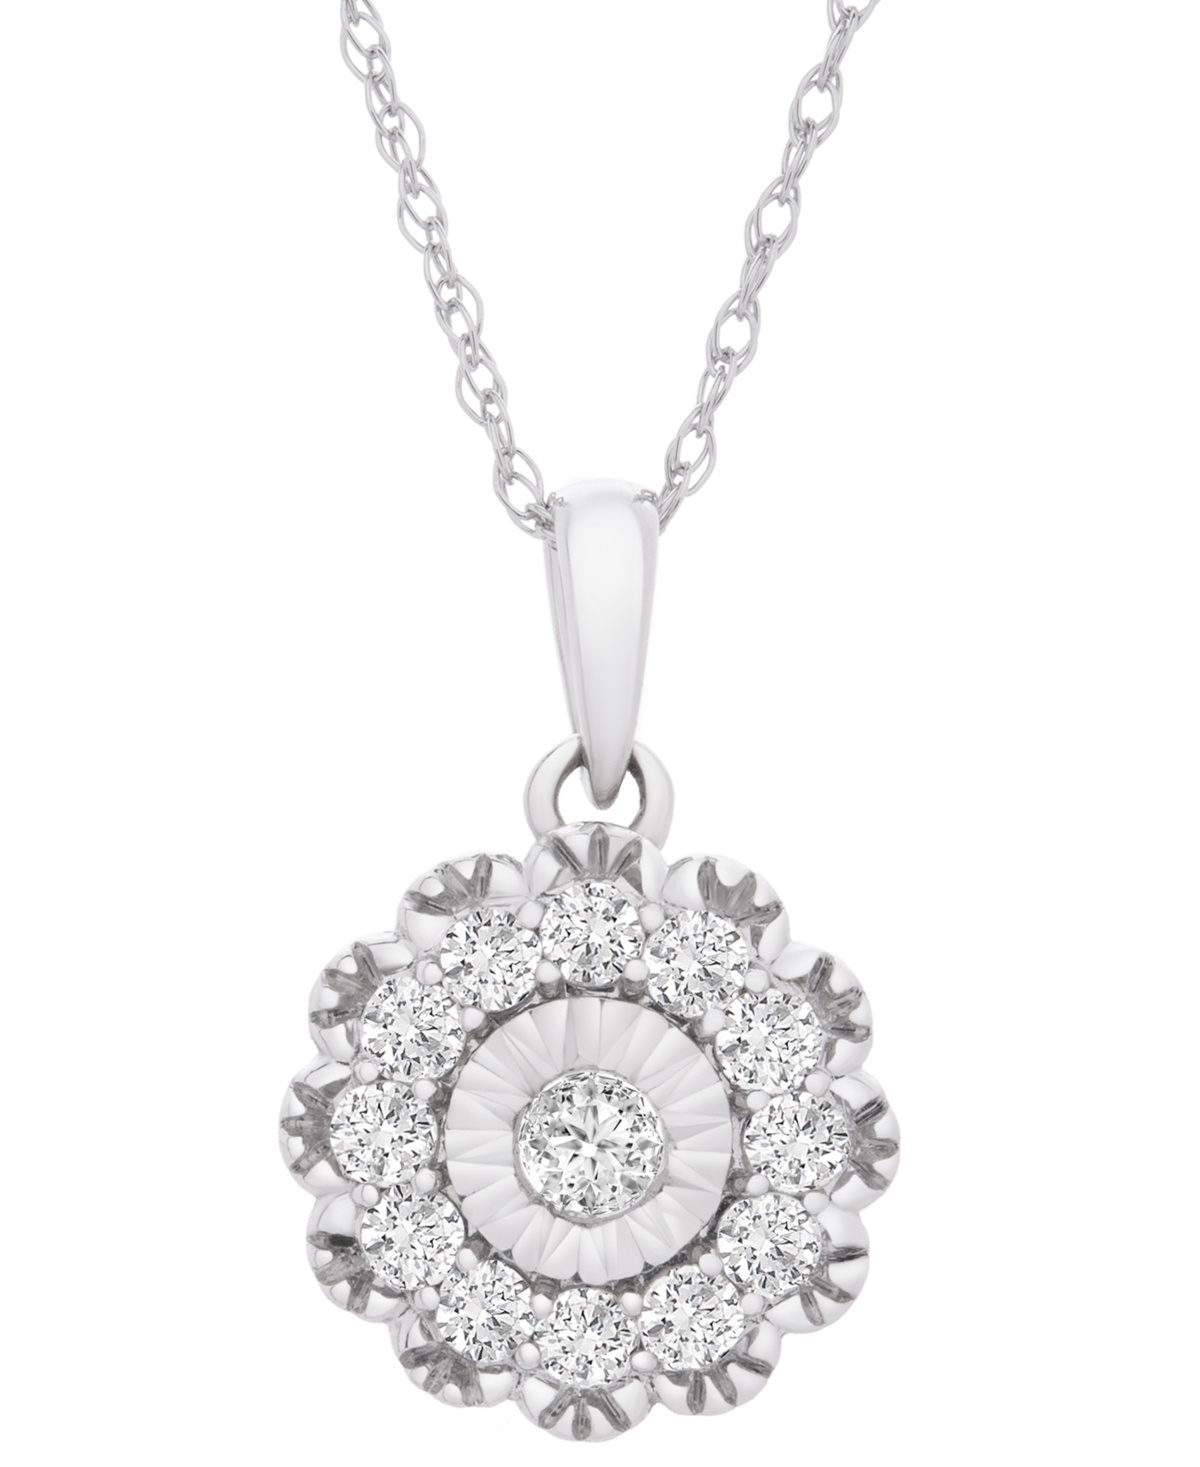 Wrapped In Love Diamond Flower Pendant Necklace (1/2 Ct. Tw) In 14k White Gold, 18" + 2" Extender, Created For Macy'